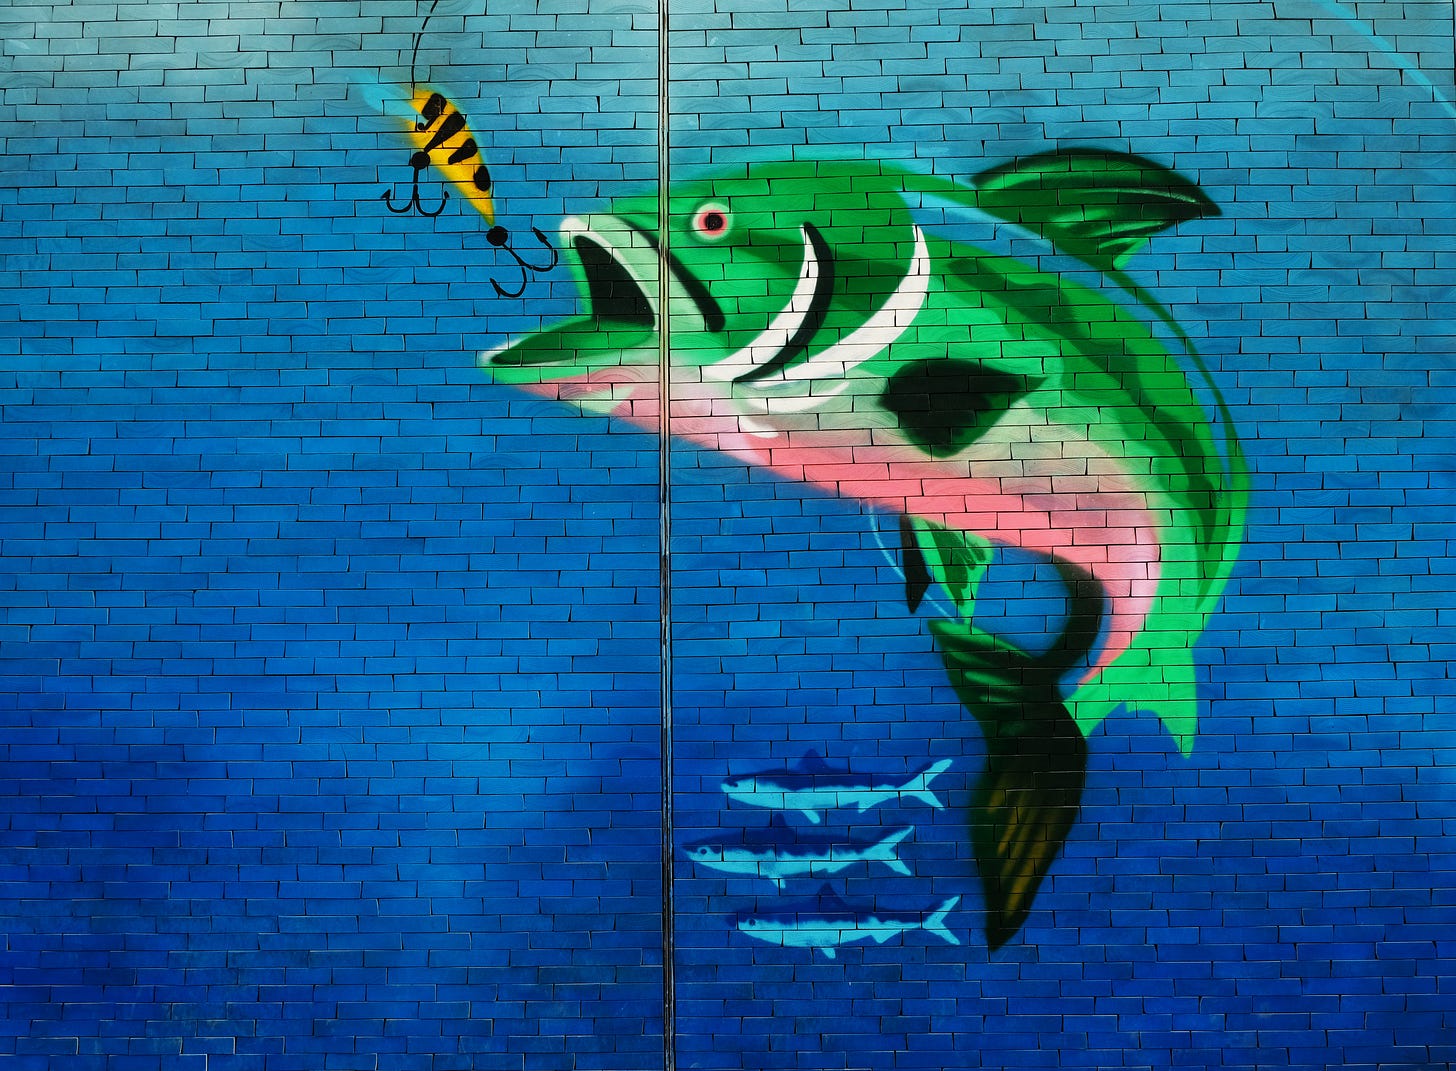 wall art of a big fish being caught by bait while the smaller fish keep swimming